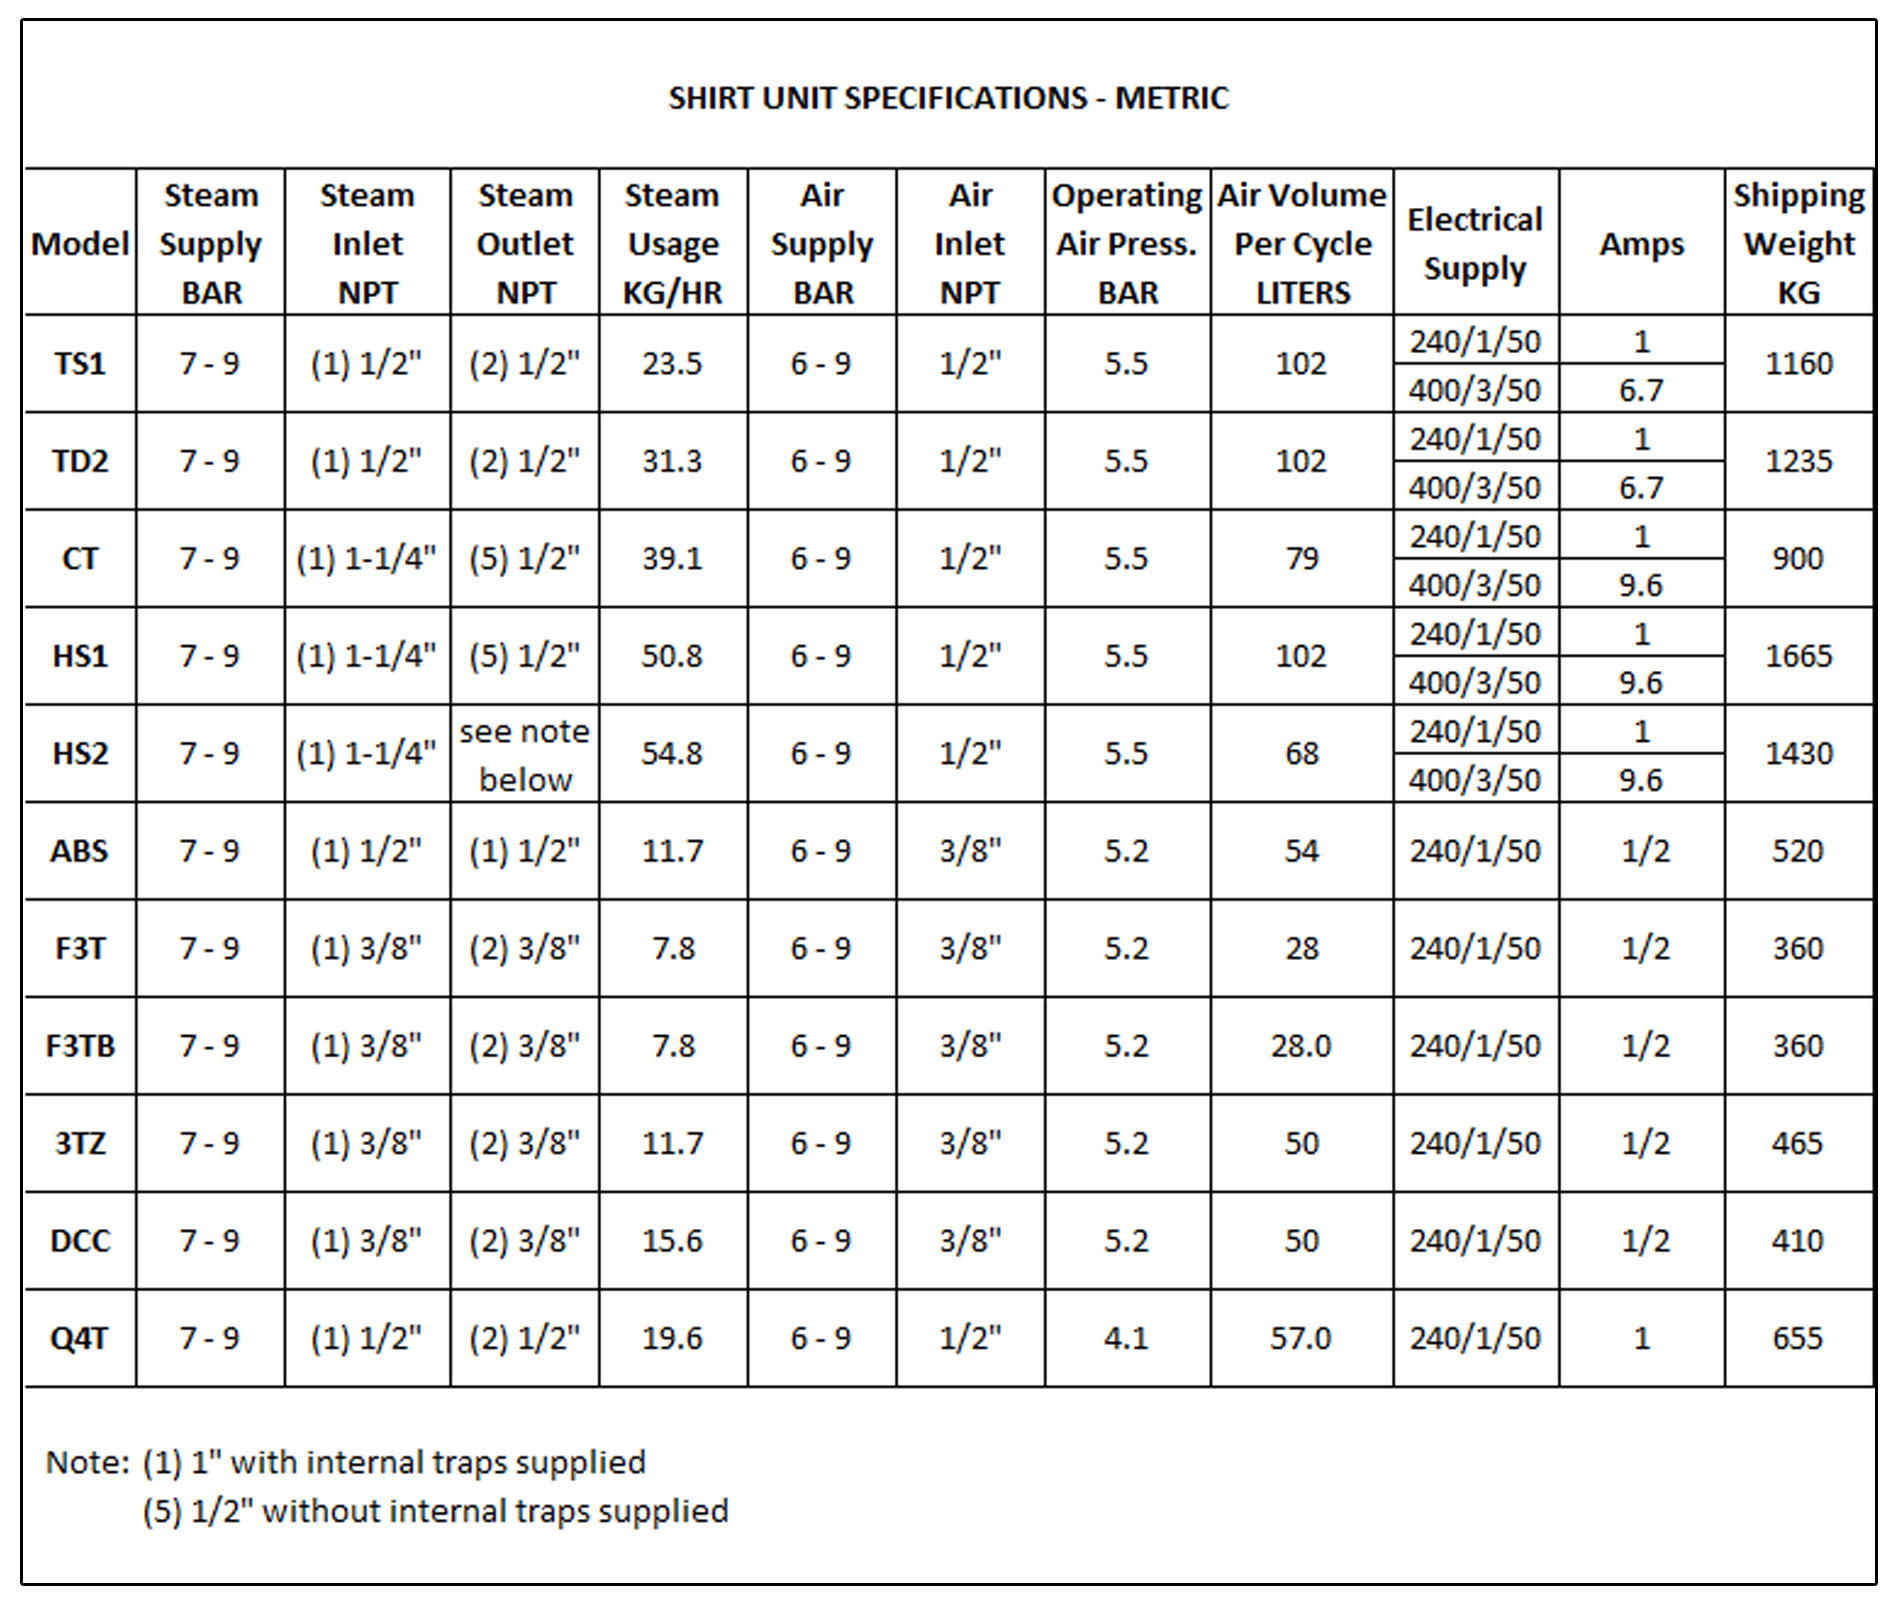 Shirt Unit Specifications Metric